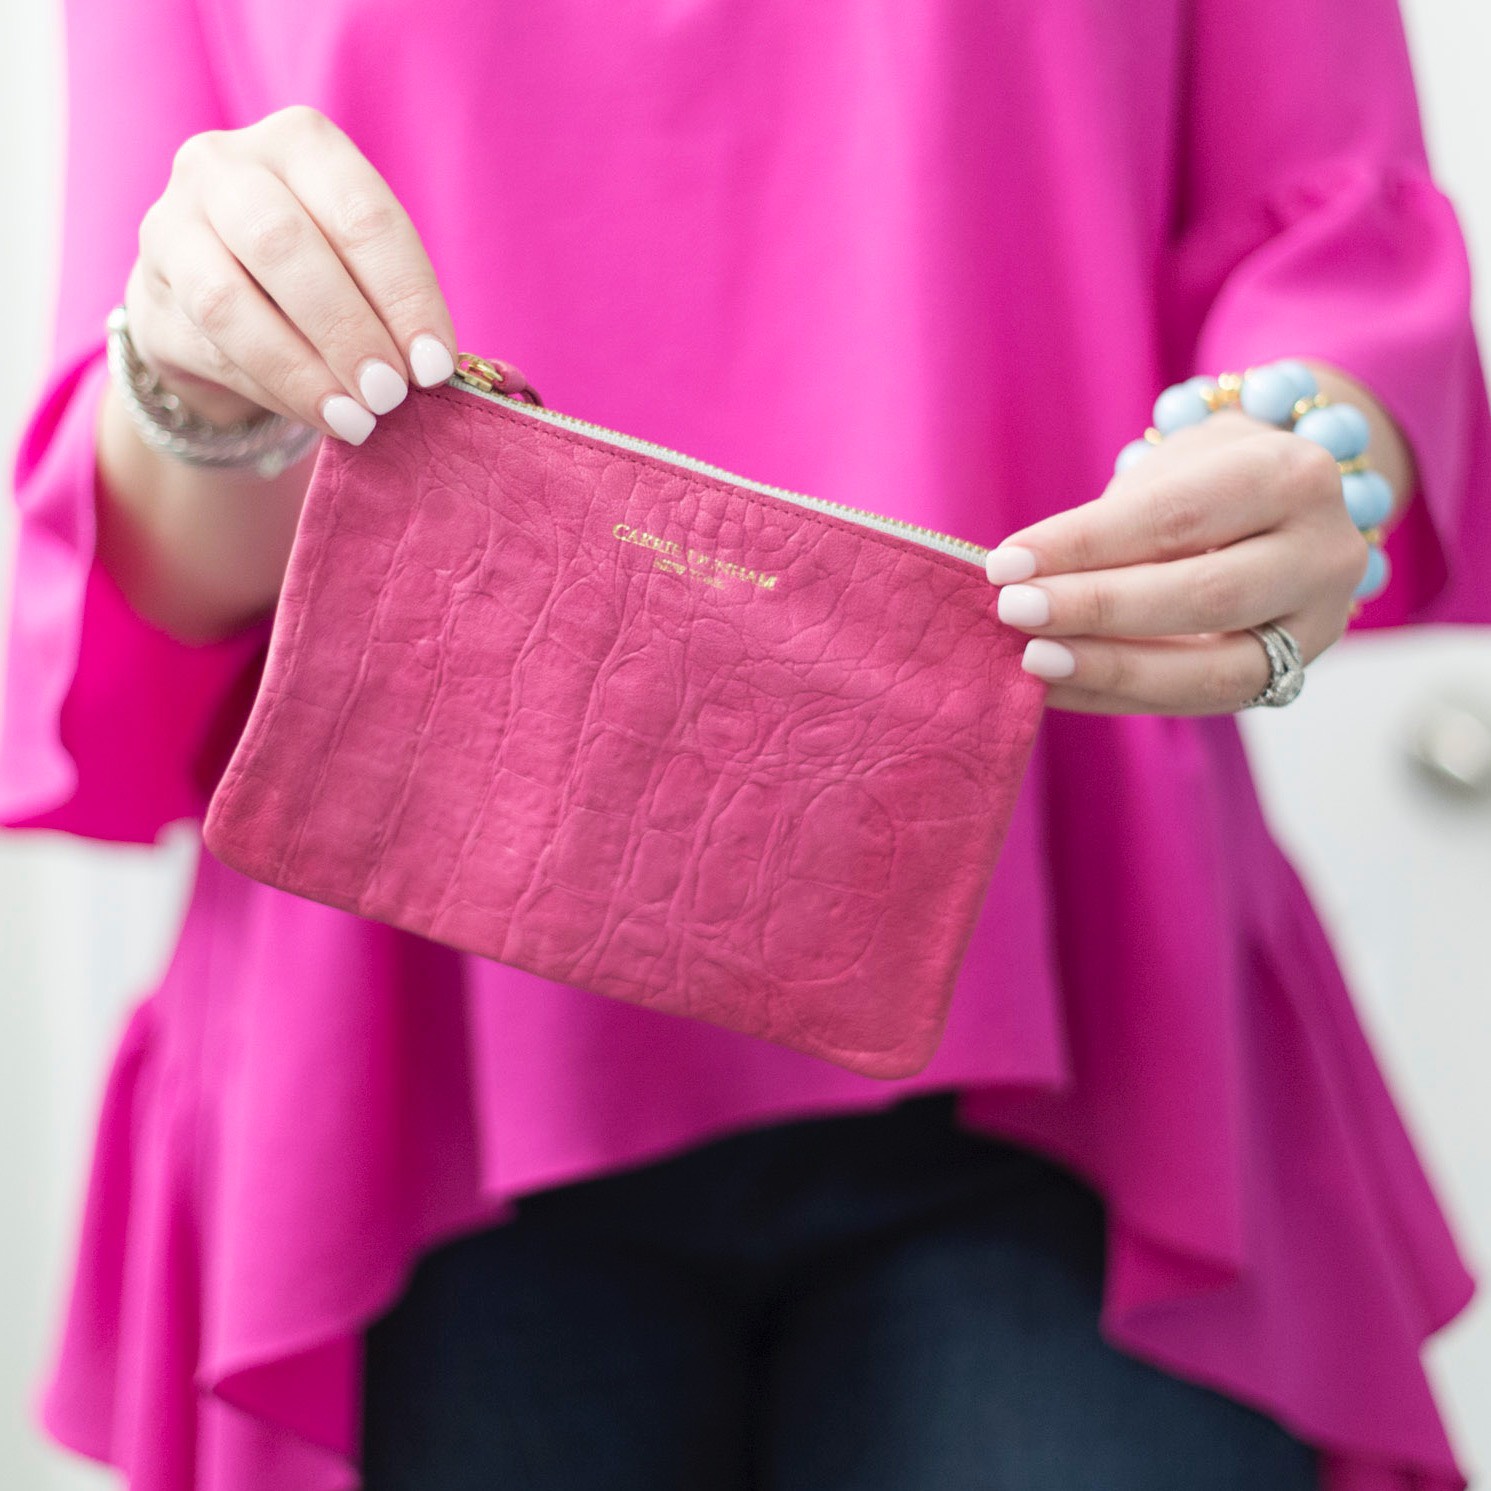 Florida lifestyle blogger, MikaelaJ, shares what she's currently loving + the cutest zip pouch from Carrie Dunham. Check it out!